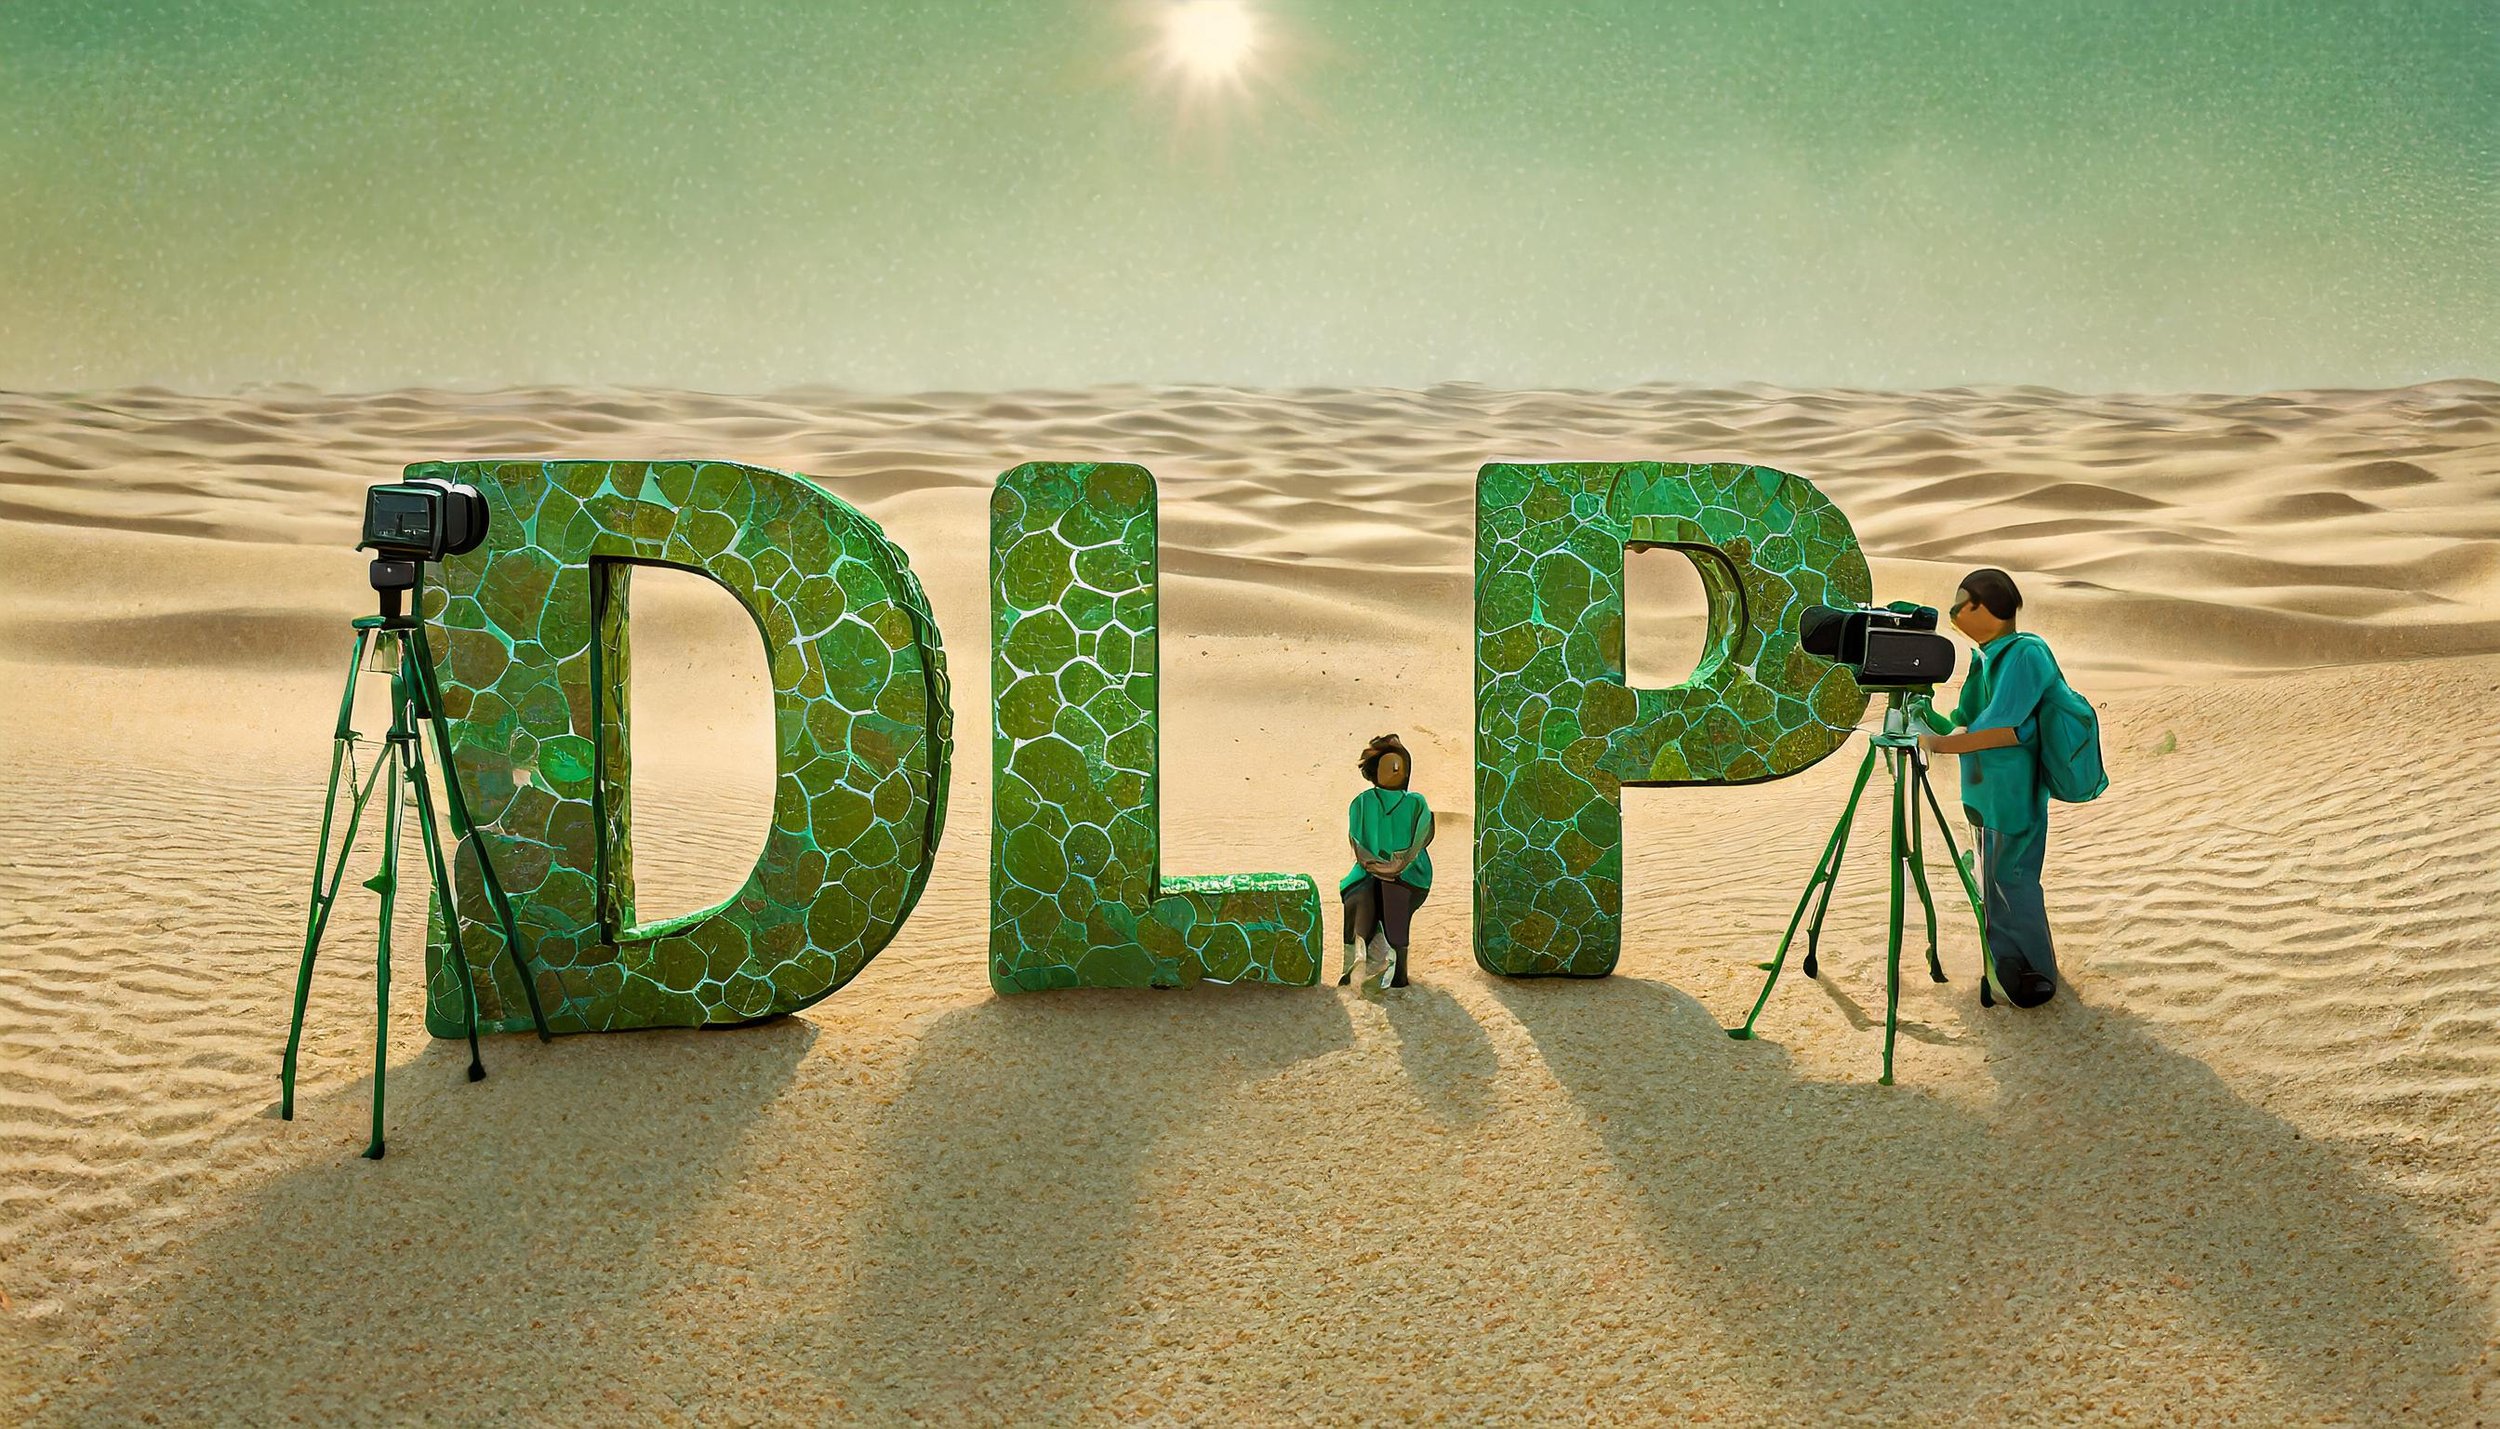 Firefly the large letters DLP, which are green in color and textured like stones, sit together in a .jpg